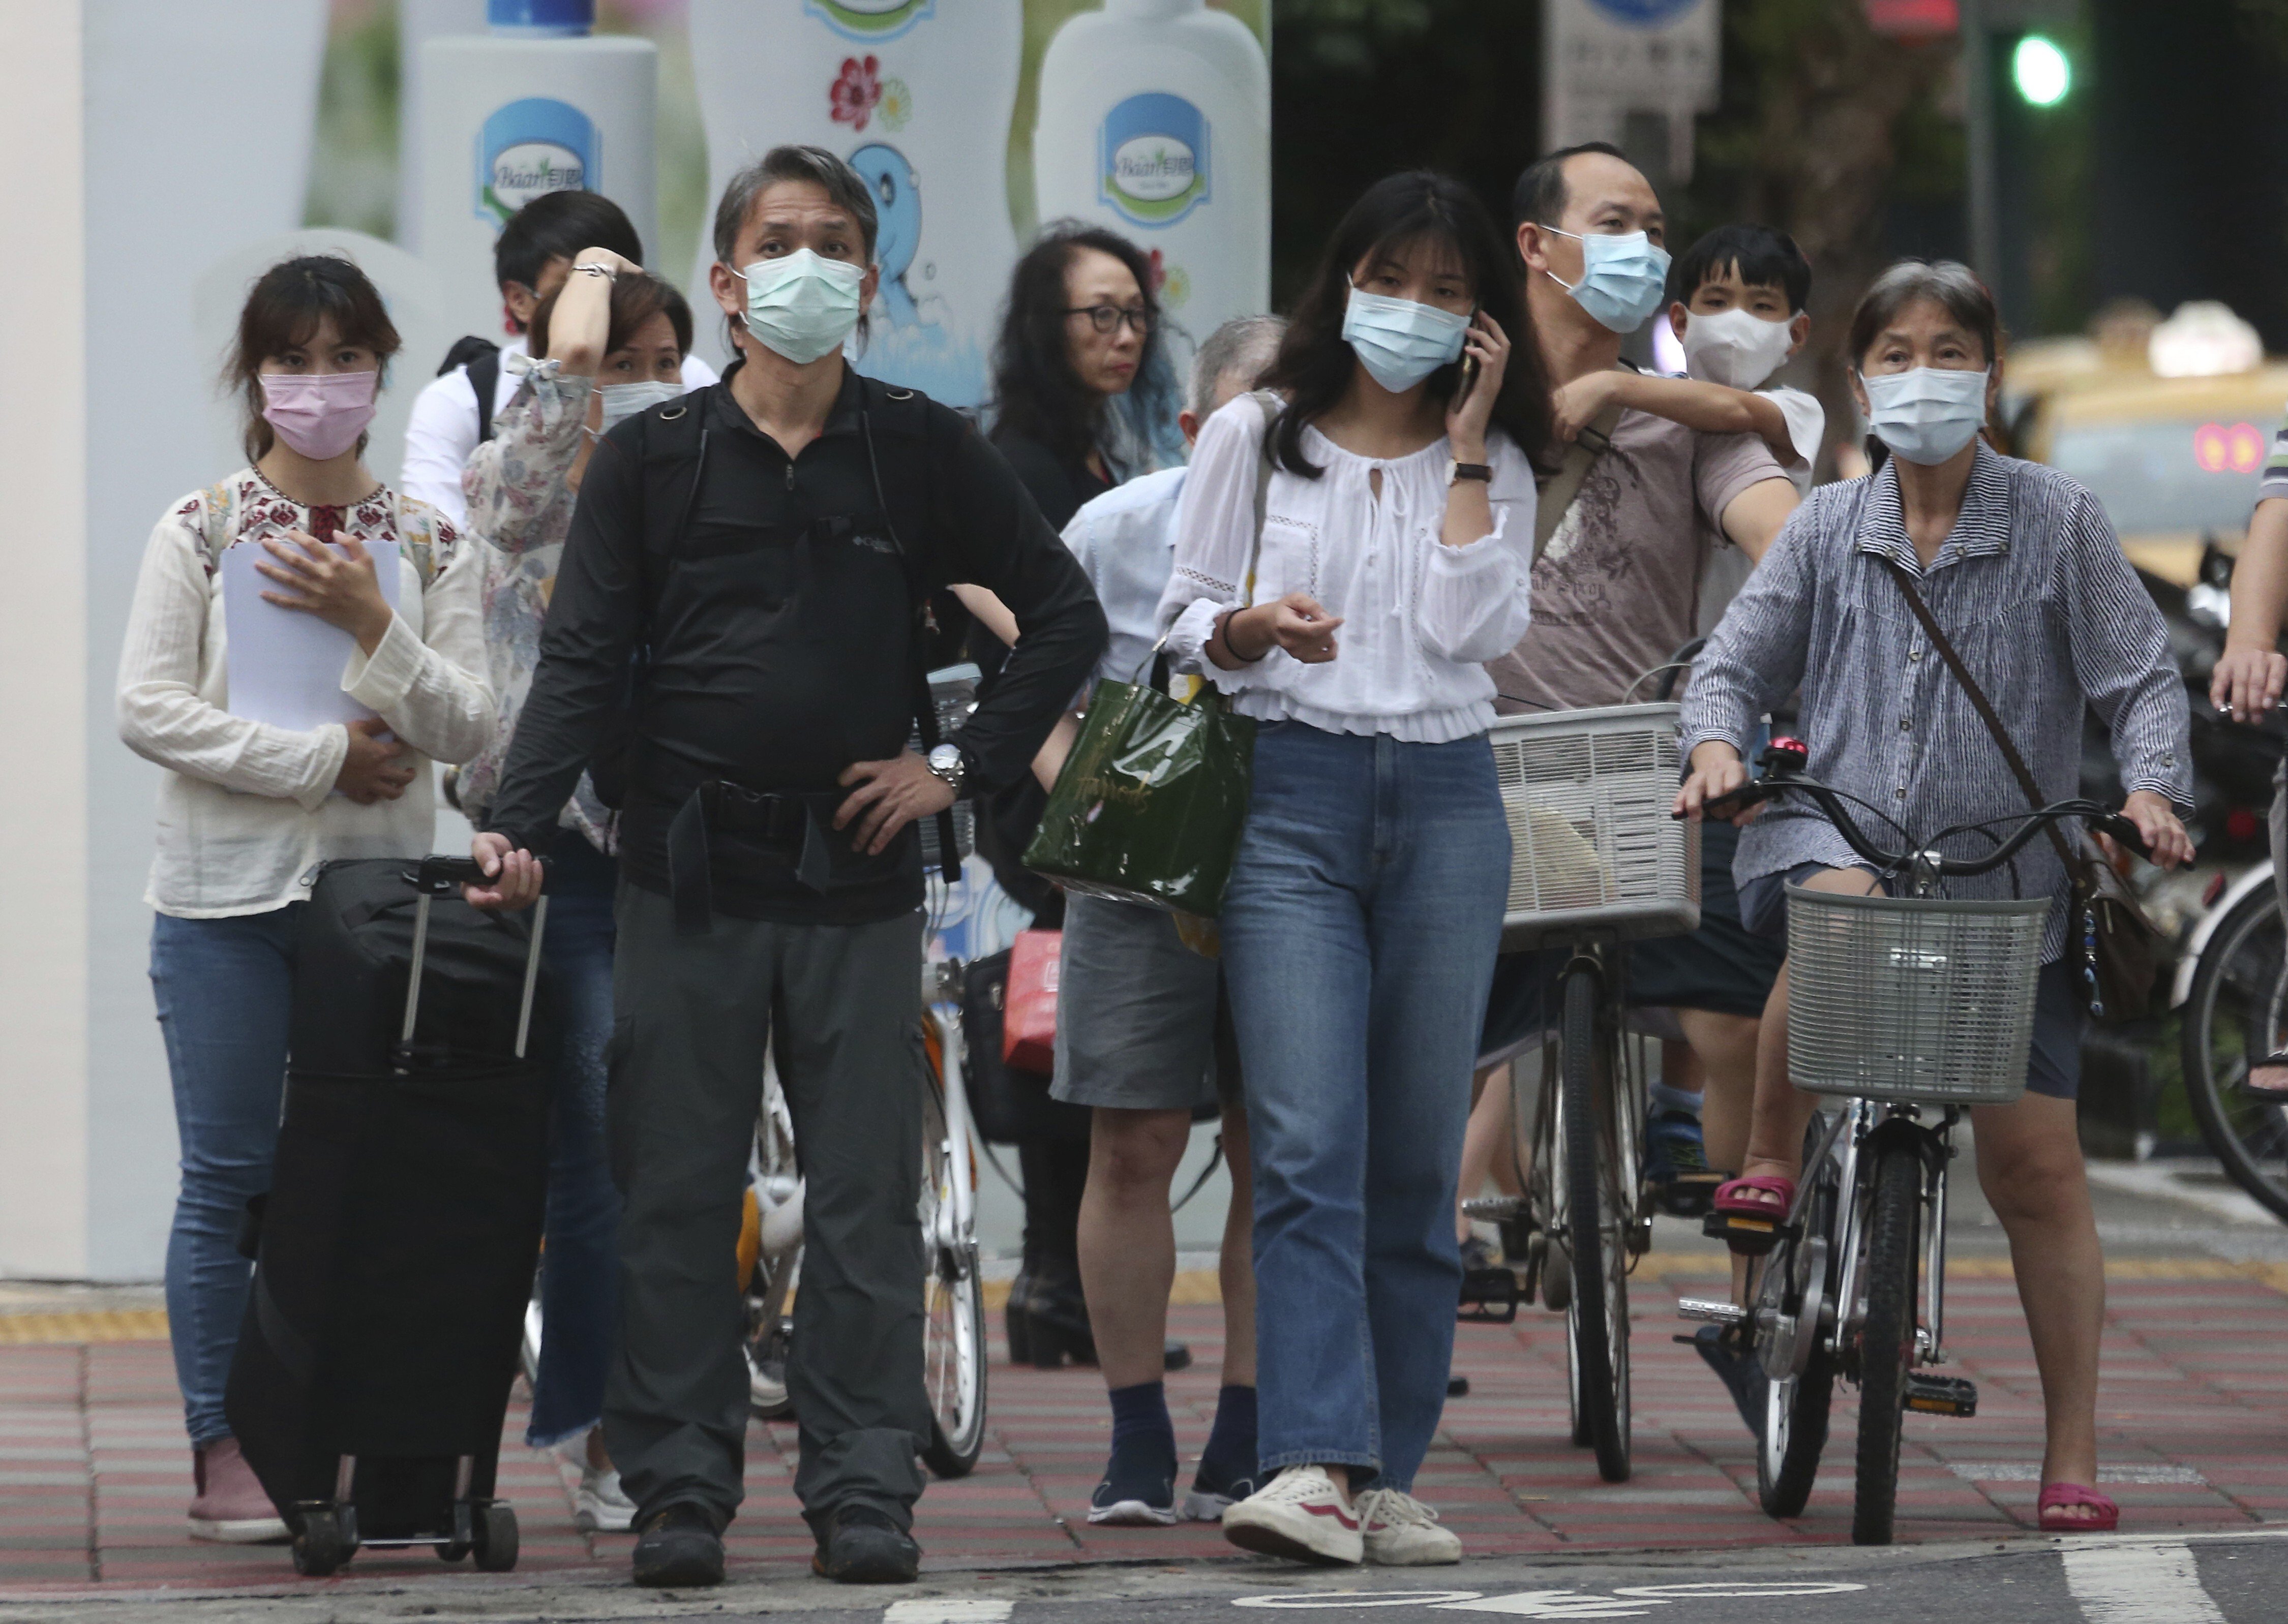 People wearing face masks to protect against the spread of the coronavirus travel around Taipei on May 18. Well-established practices such as wearing masks, transparency and trust in science have helped Taiwan assemble one of the world’s must successful Covid-19 pandemic responses. Photo: AP